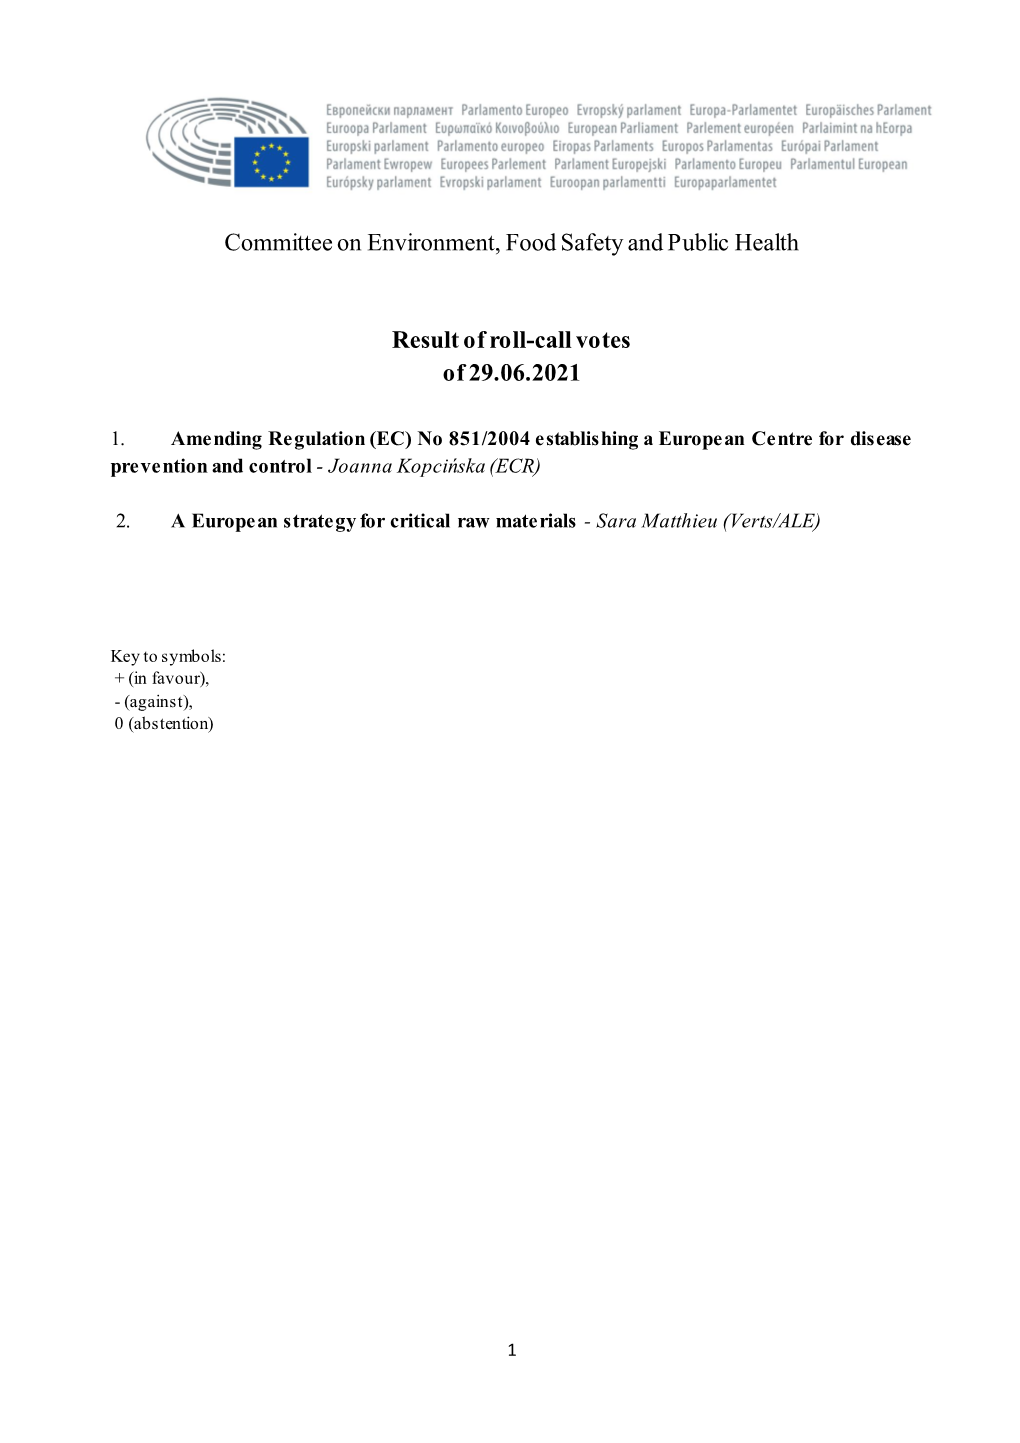 Committee on Environment, Food Safety and Public Health Result of Roll-Call Votes of 29.06.2021